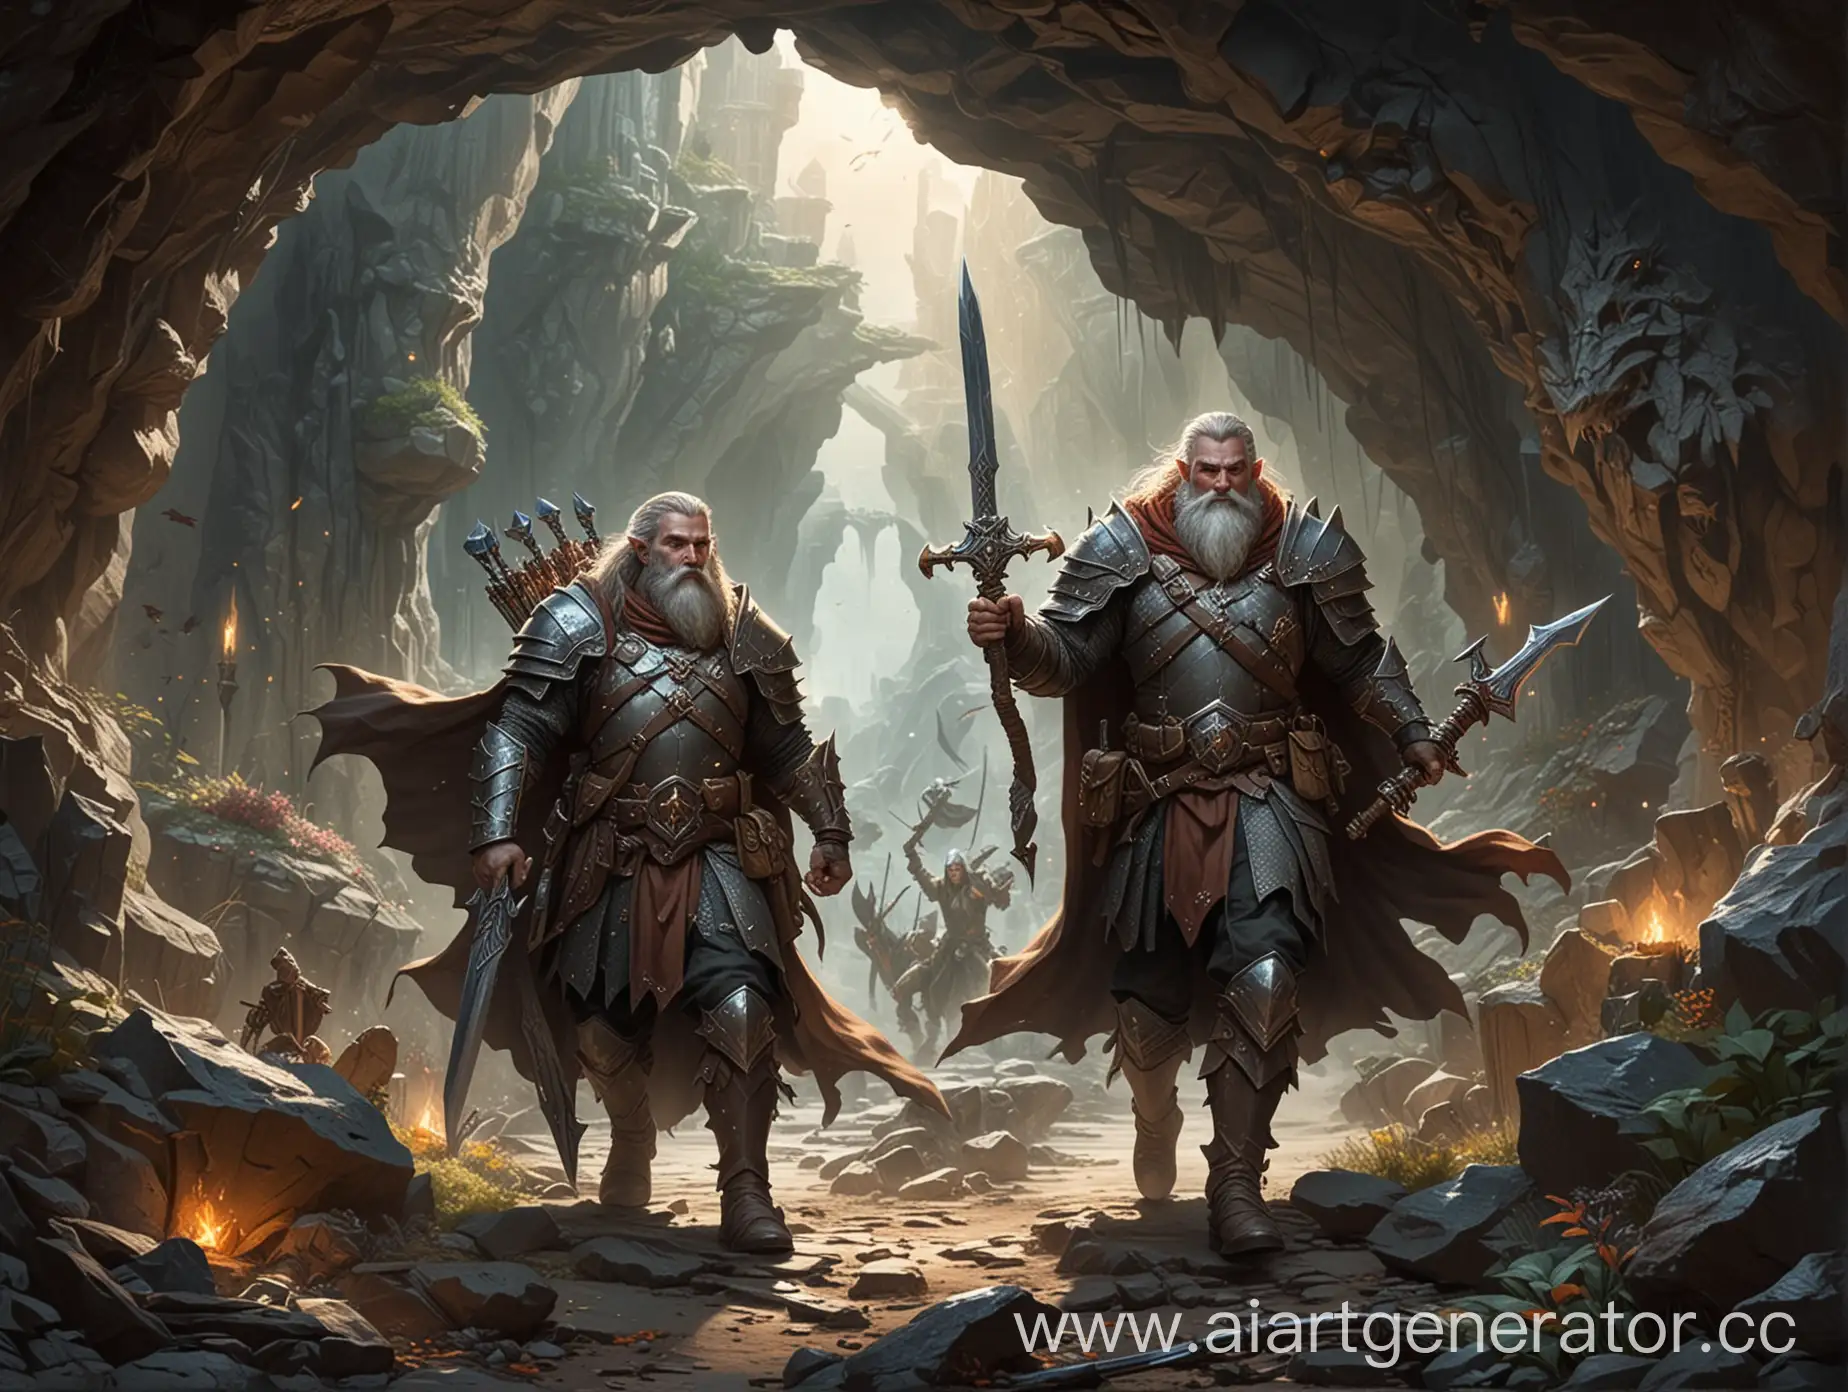 Paladin-Party-Confronts-Dragon-in-Cave-with-Swords-and-Magic